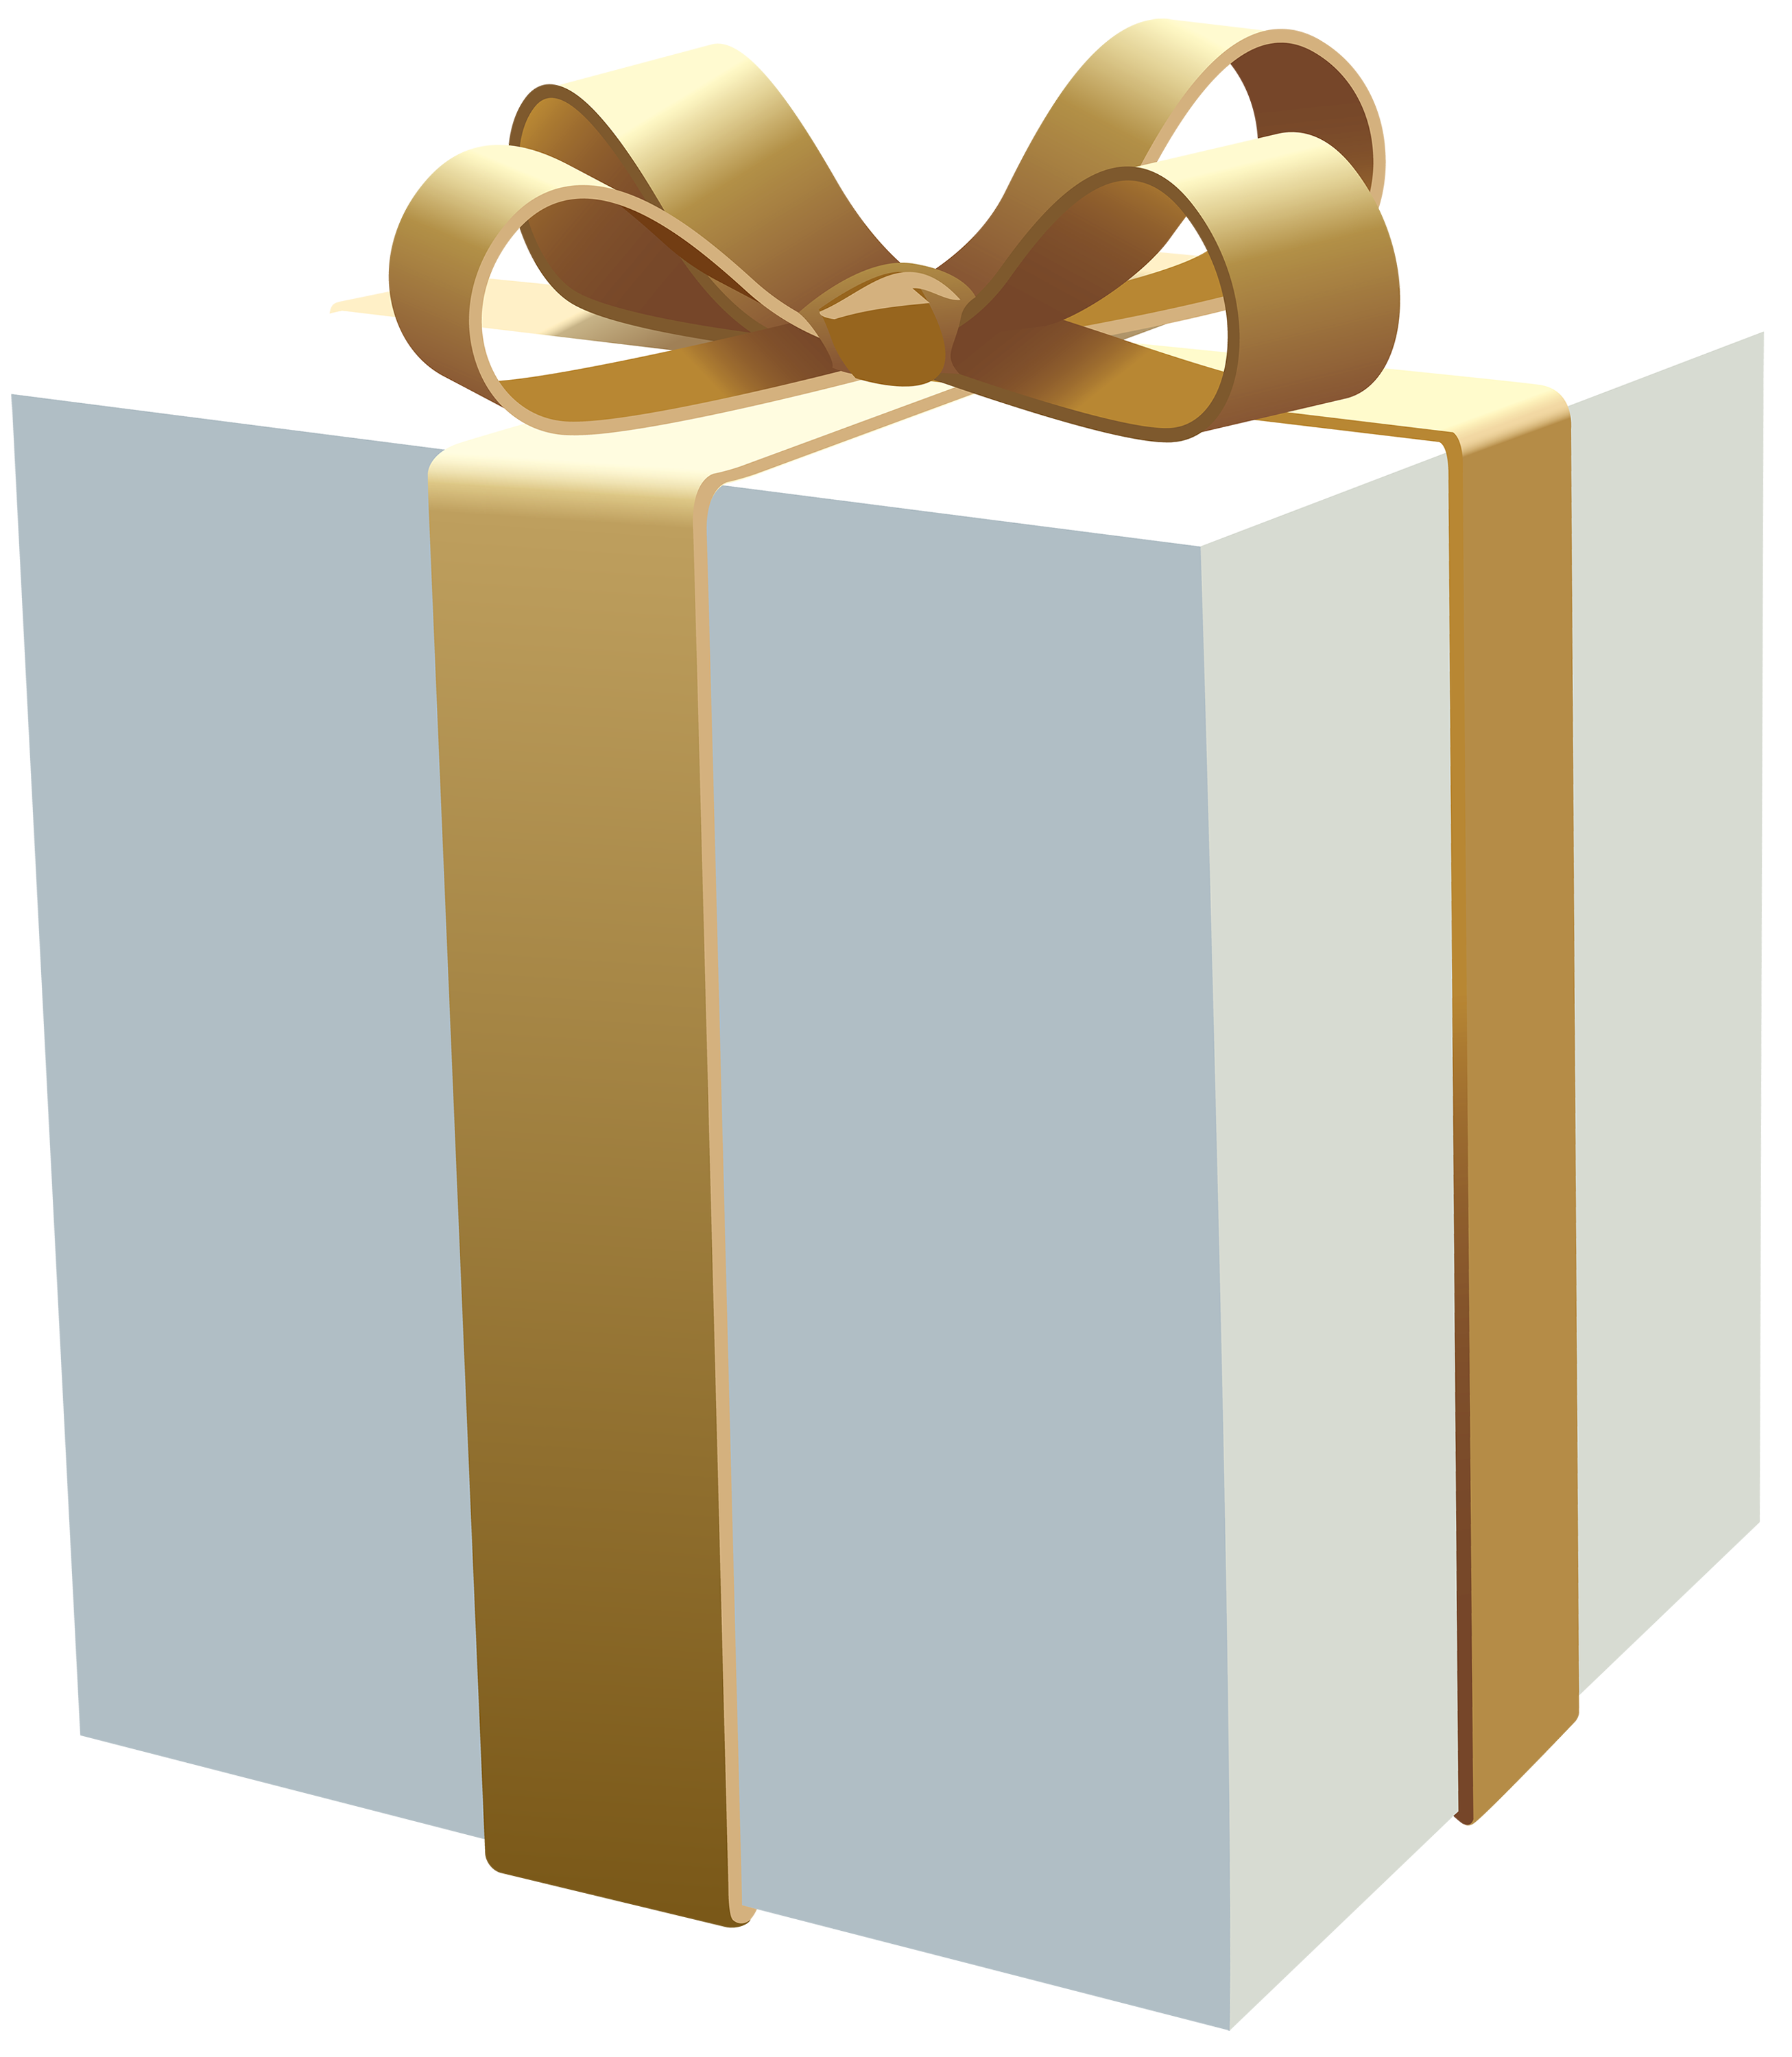 gift clipart pile gift